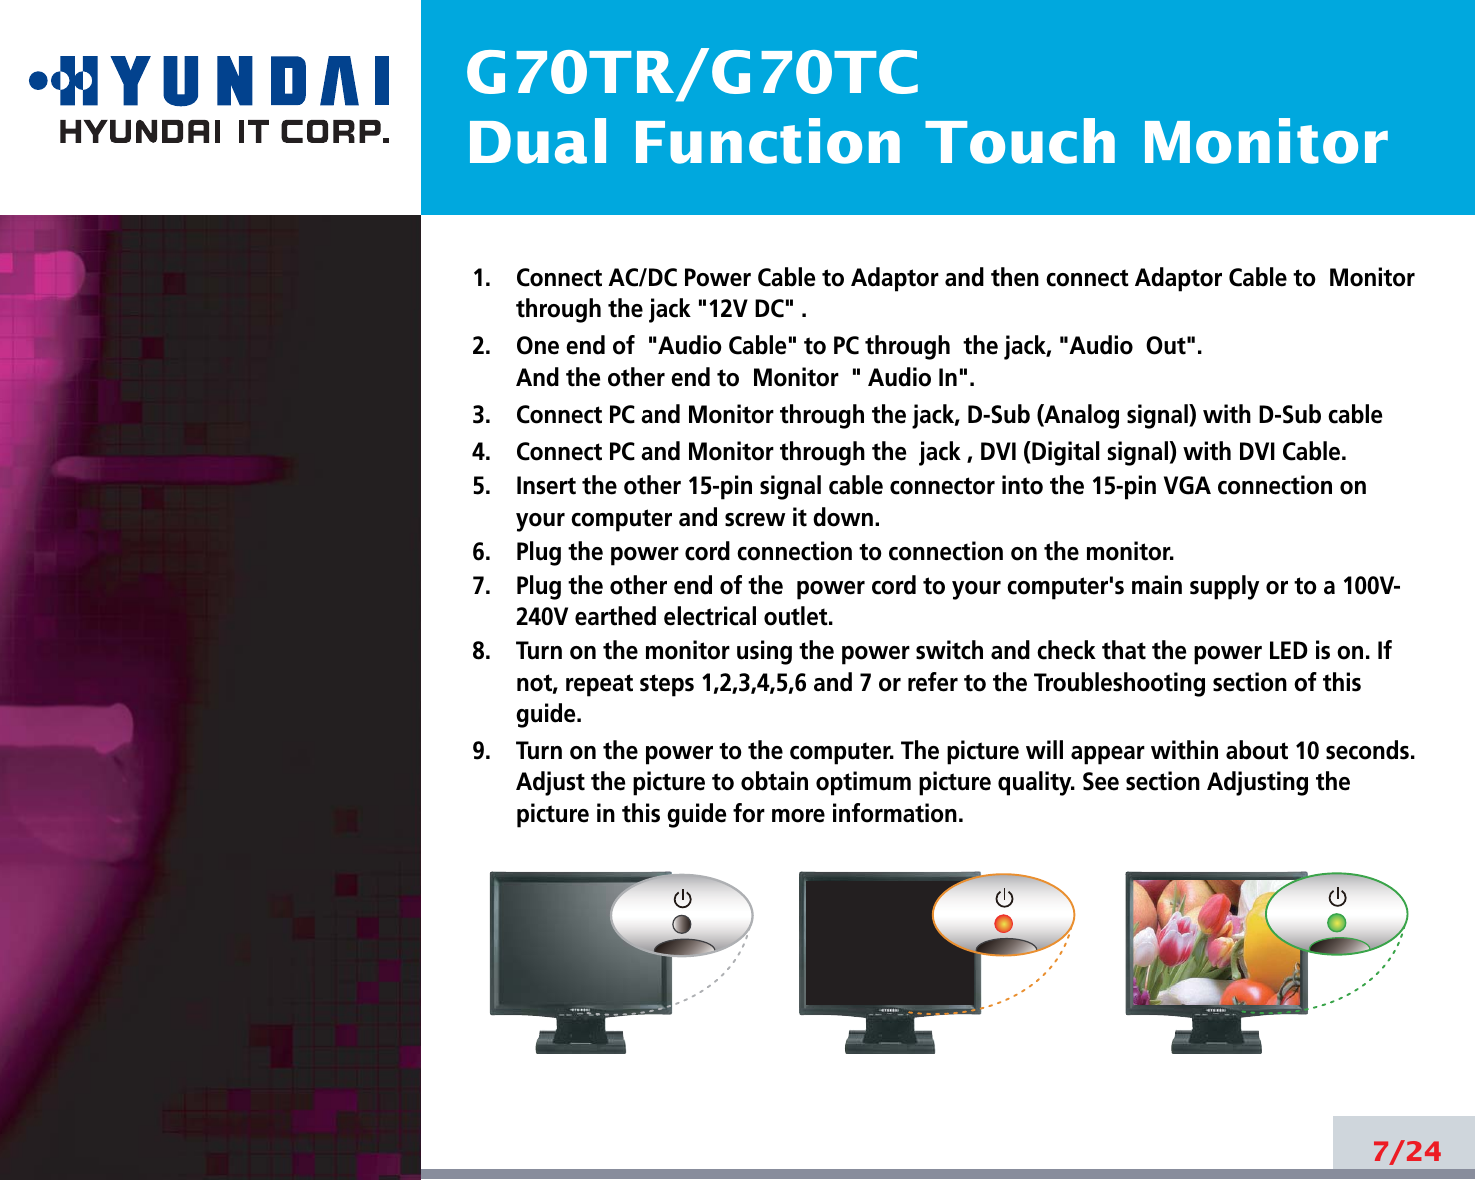 G70TR/G70TCDual Function Touch Monitor7/241.    Connect AC/DC Power Cable to Adaptor and then connect Adaptor Cable to  Monitorthrough the jack &quot;12V DC&quot; .2.    One end of &quot;Audio Cable&quot; to PC through  the jack, &quot;Audio  Out&quot;.And the other end to  Monitor  &quot; Audio In&quot;.3.    Connect PC and Monitor through the jack, D-Sub (Analog signal) with D-Sub cable4.    Connect PC and Monitor through the  jack , DVI (Digital signal) with DVI Cable.5.    Insert the other 15-pin signal cable connector into the 15-pin VGA connection onyour computer and screw it down. 6.    Plug the power cord connection to connection on the monitor.7.    Plug the other end of the  power cord to your computer&apos;s main supply or to a 100V-240V earthed electrical outlet.8.    Turn on the monitor using the power switch and check that the power LED is on. Ifnot, repeat steps 1,2,3,4,5,6 and 7 or refer to the Troubleshooting section of thisguide.9.    Turn on the power to the computer. The picture will appear within about 10 seconds.Adjust the picture to obtain optimum picture quality. See section Adjusting thepicture in this guide for more information.